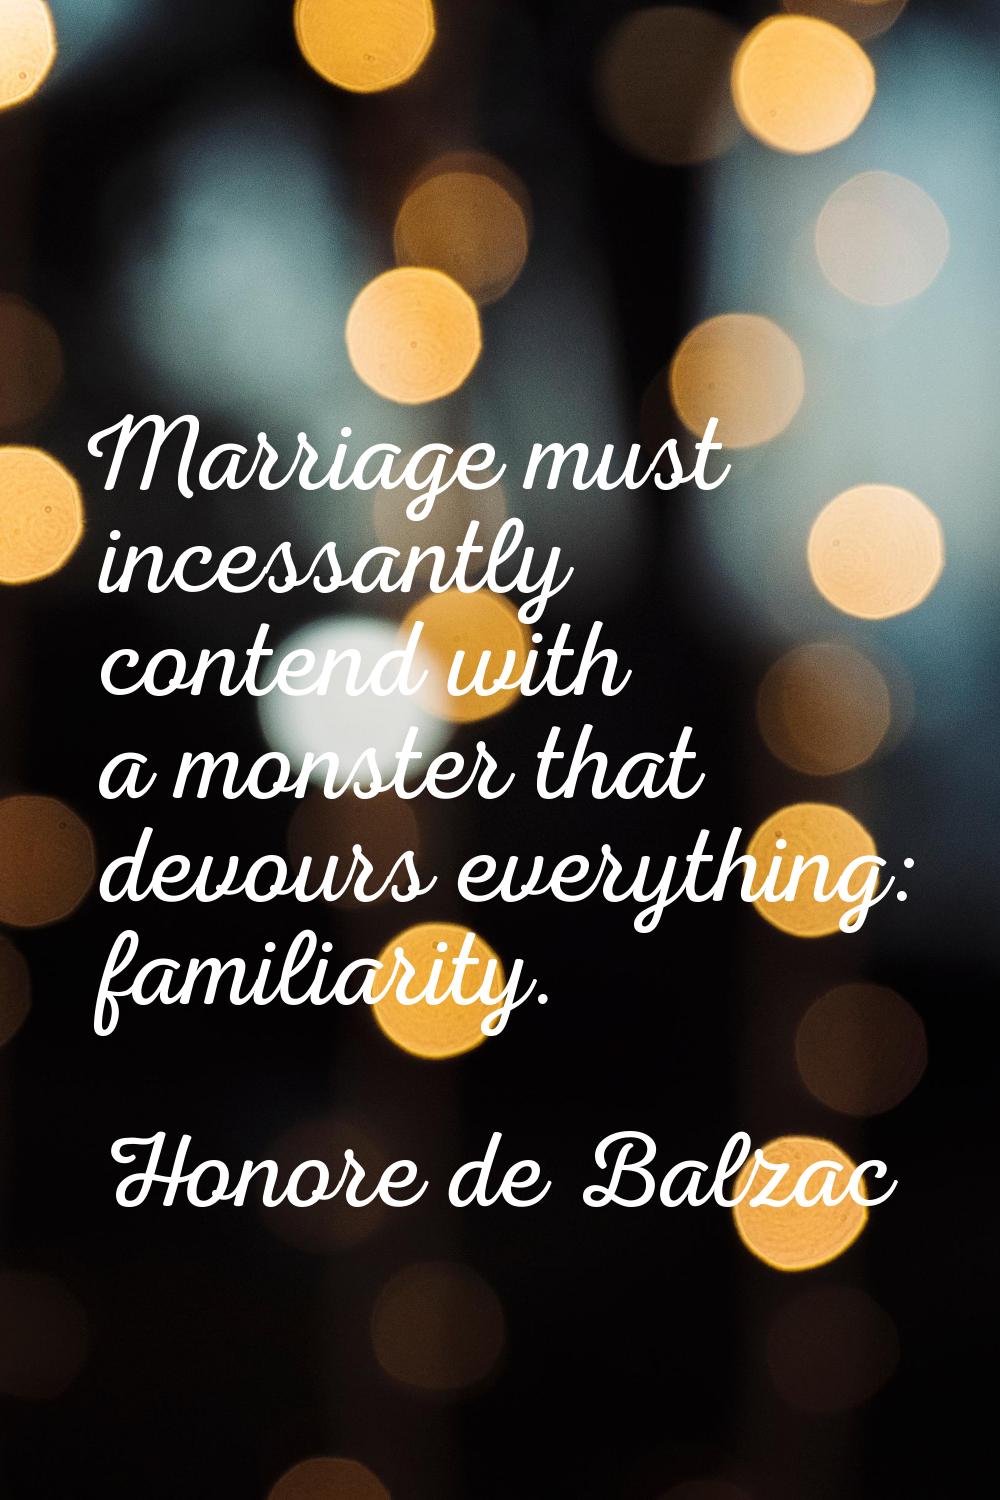 Marriage must incessantly contend with a monster that devours everything: familiarity.